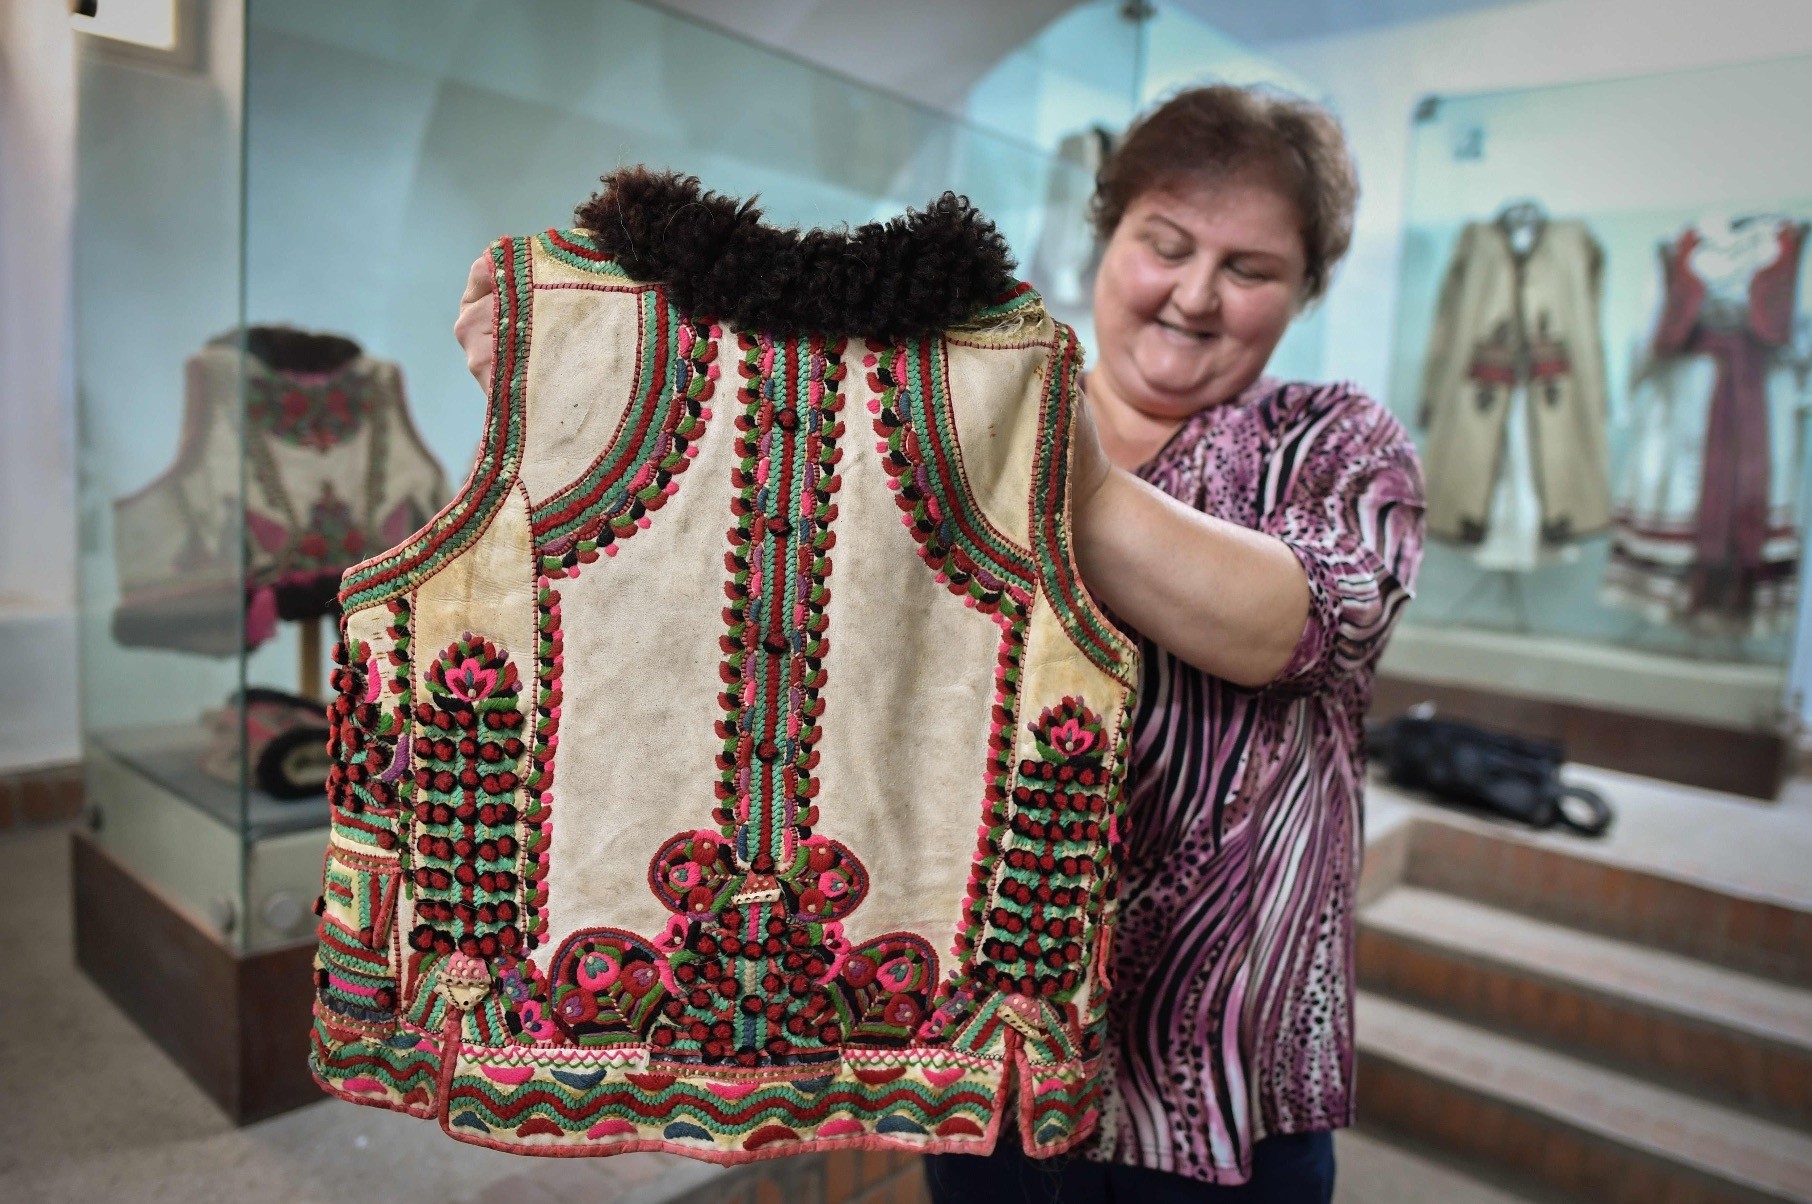 A woman working at the local museum shows a 100 year-old traditional outfit from the Bihor northwestern region of Romania in Beius, July 17.